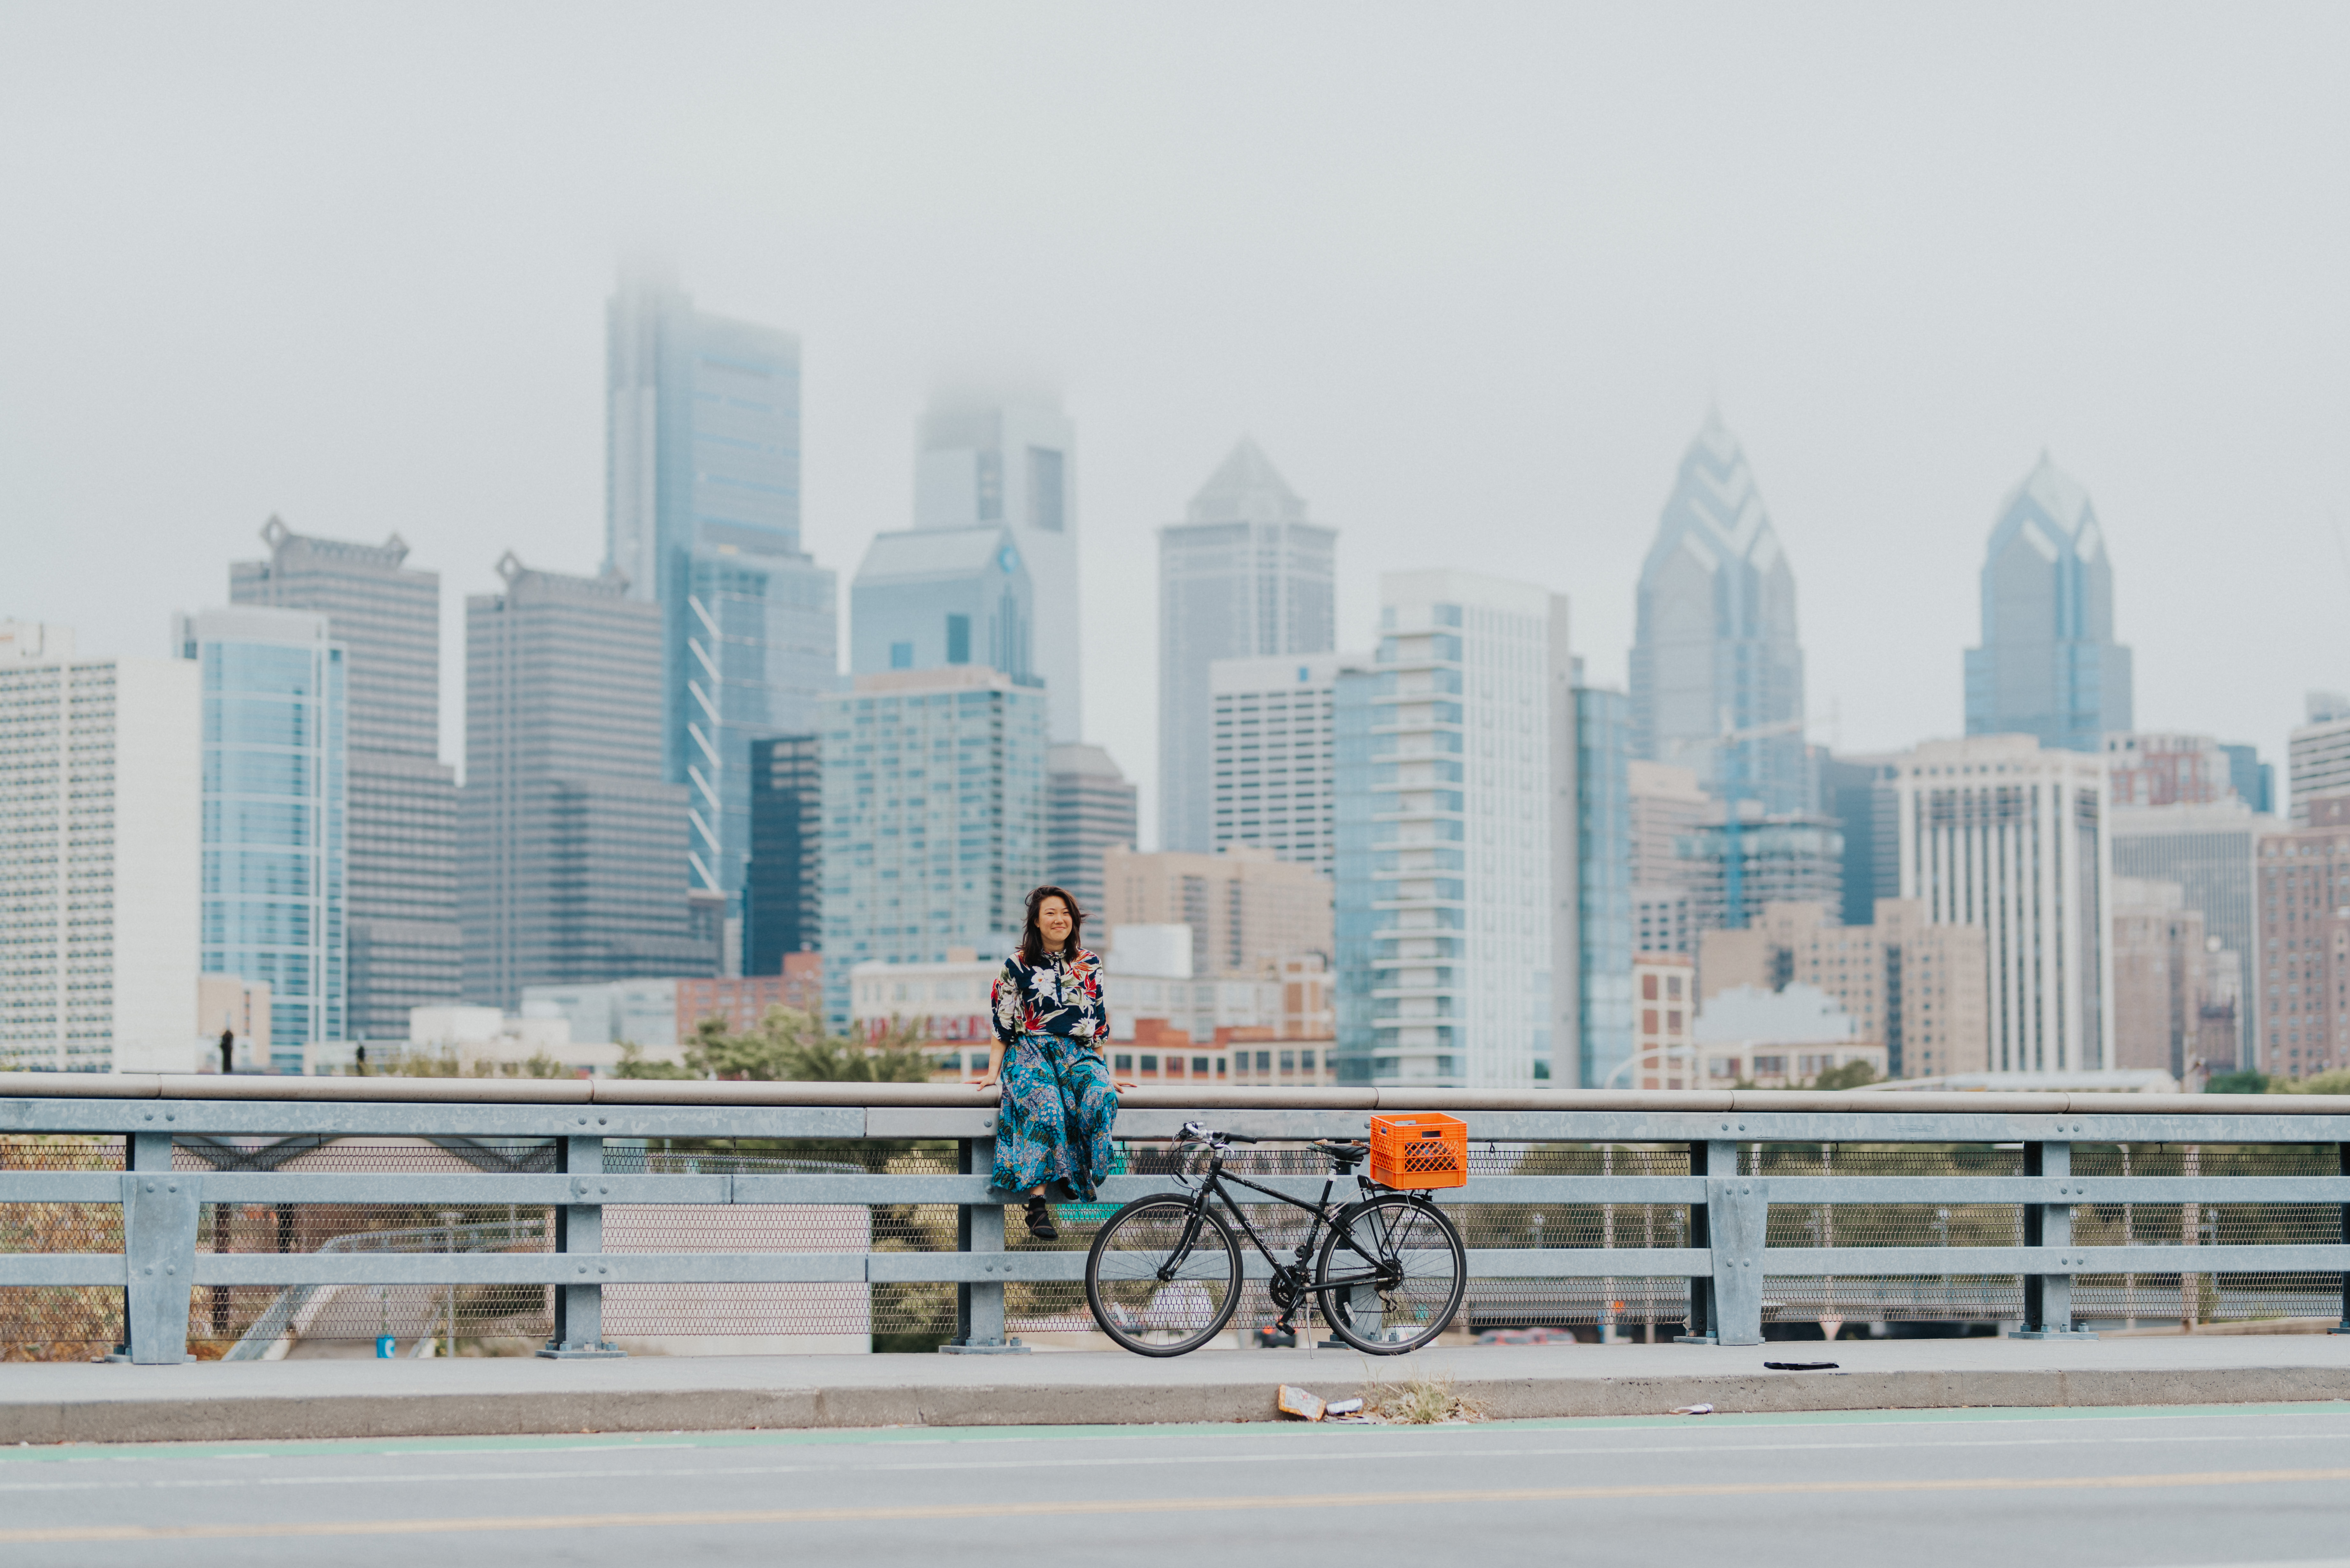 Student sitting on railing next to her bicycle, the Philadelphia skyline in the background.